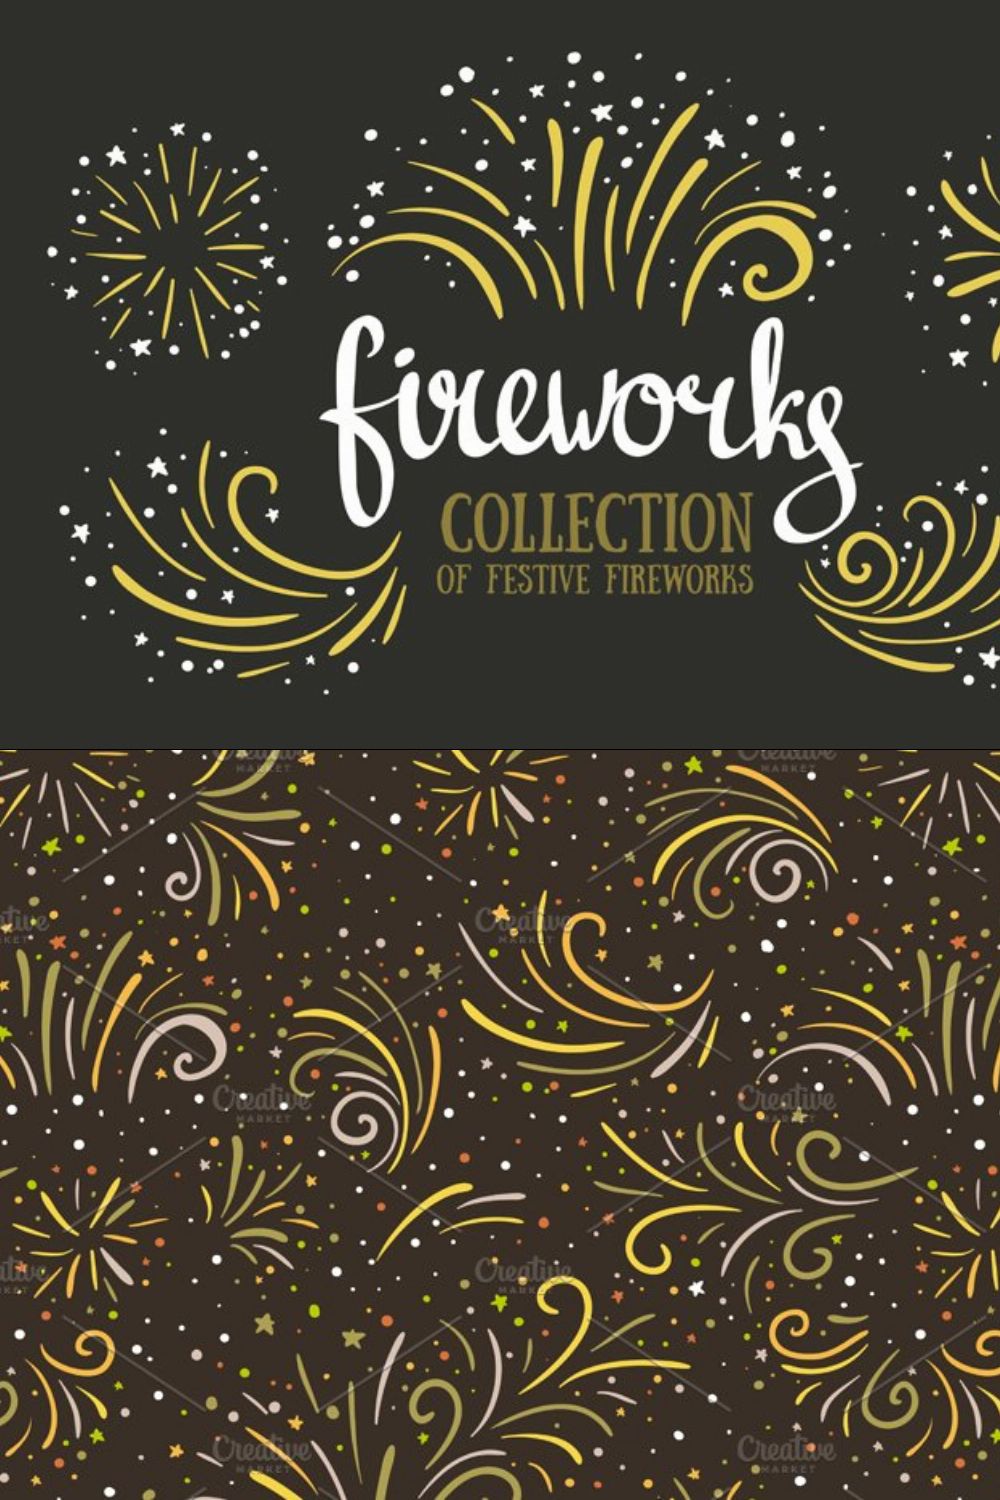 Hand drawn vector festive fireworks pinterest preview image.